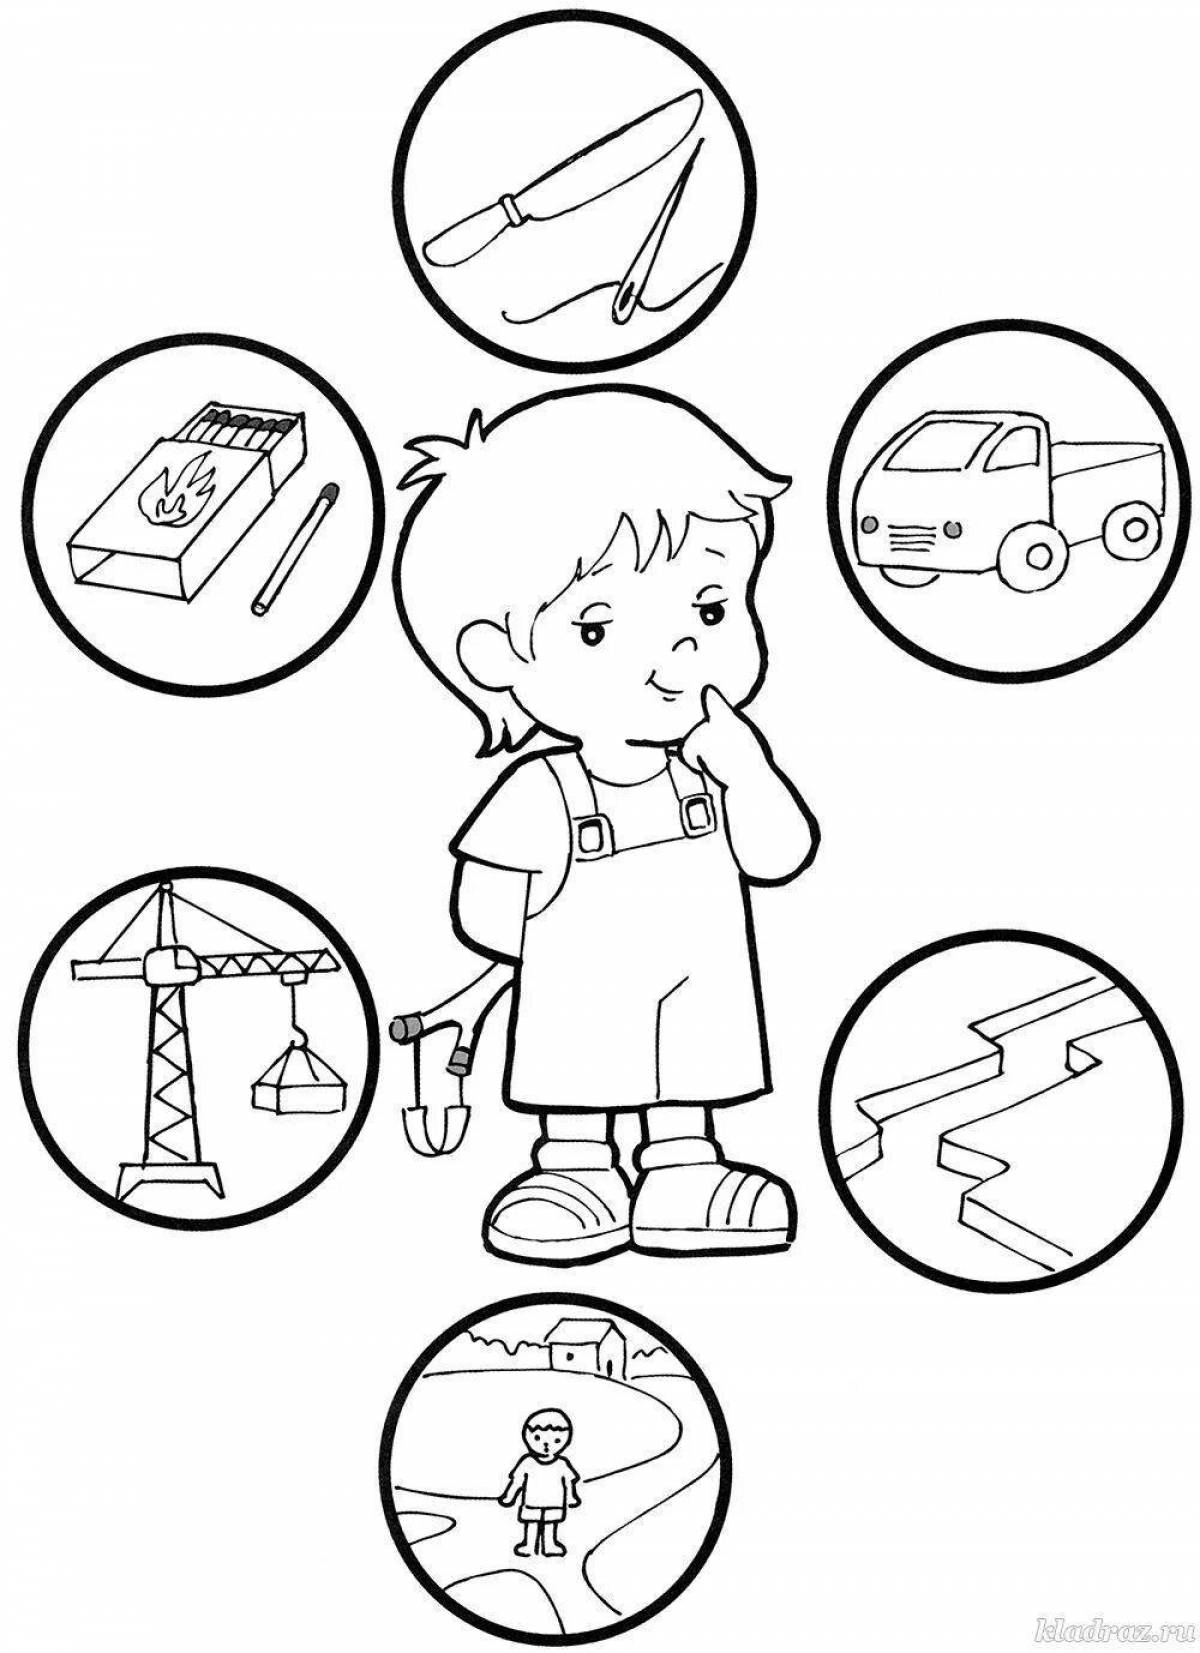 Vibrant youth safety coloring page